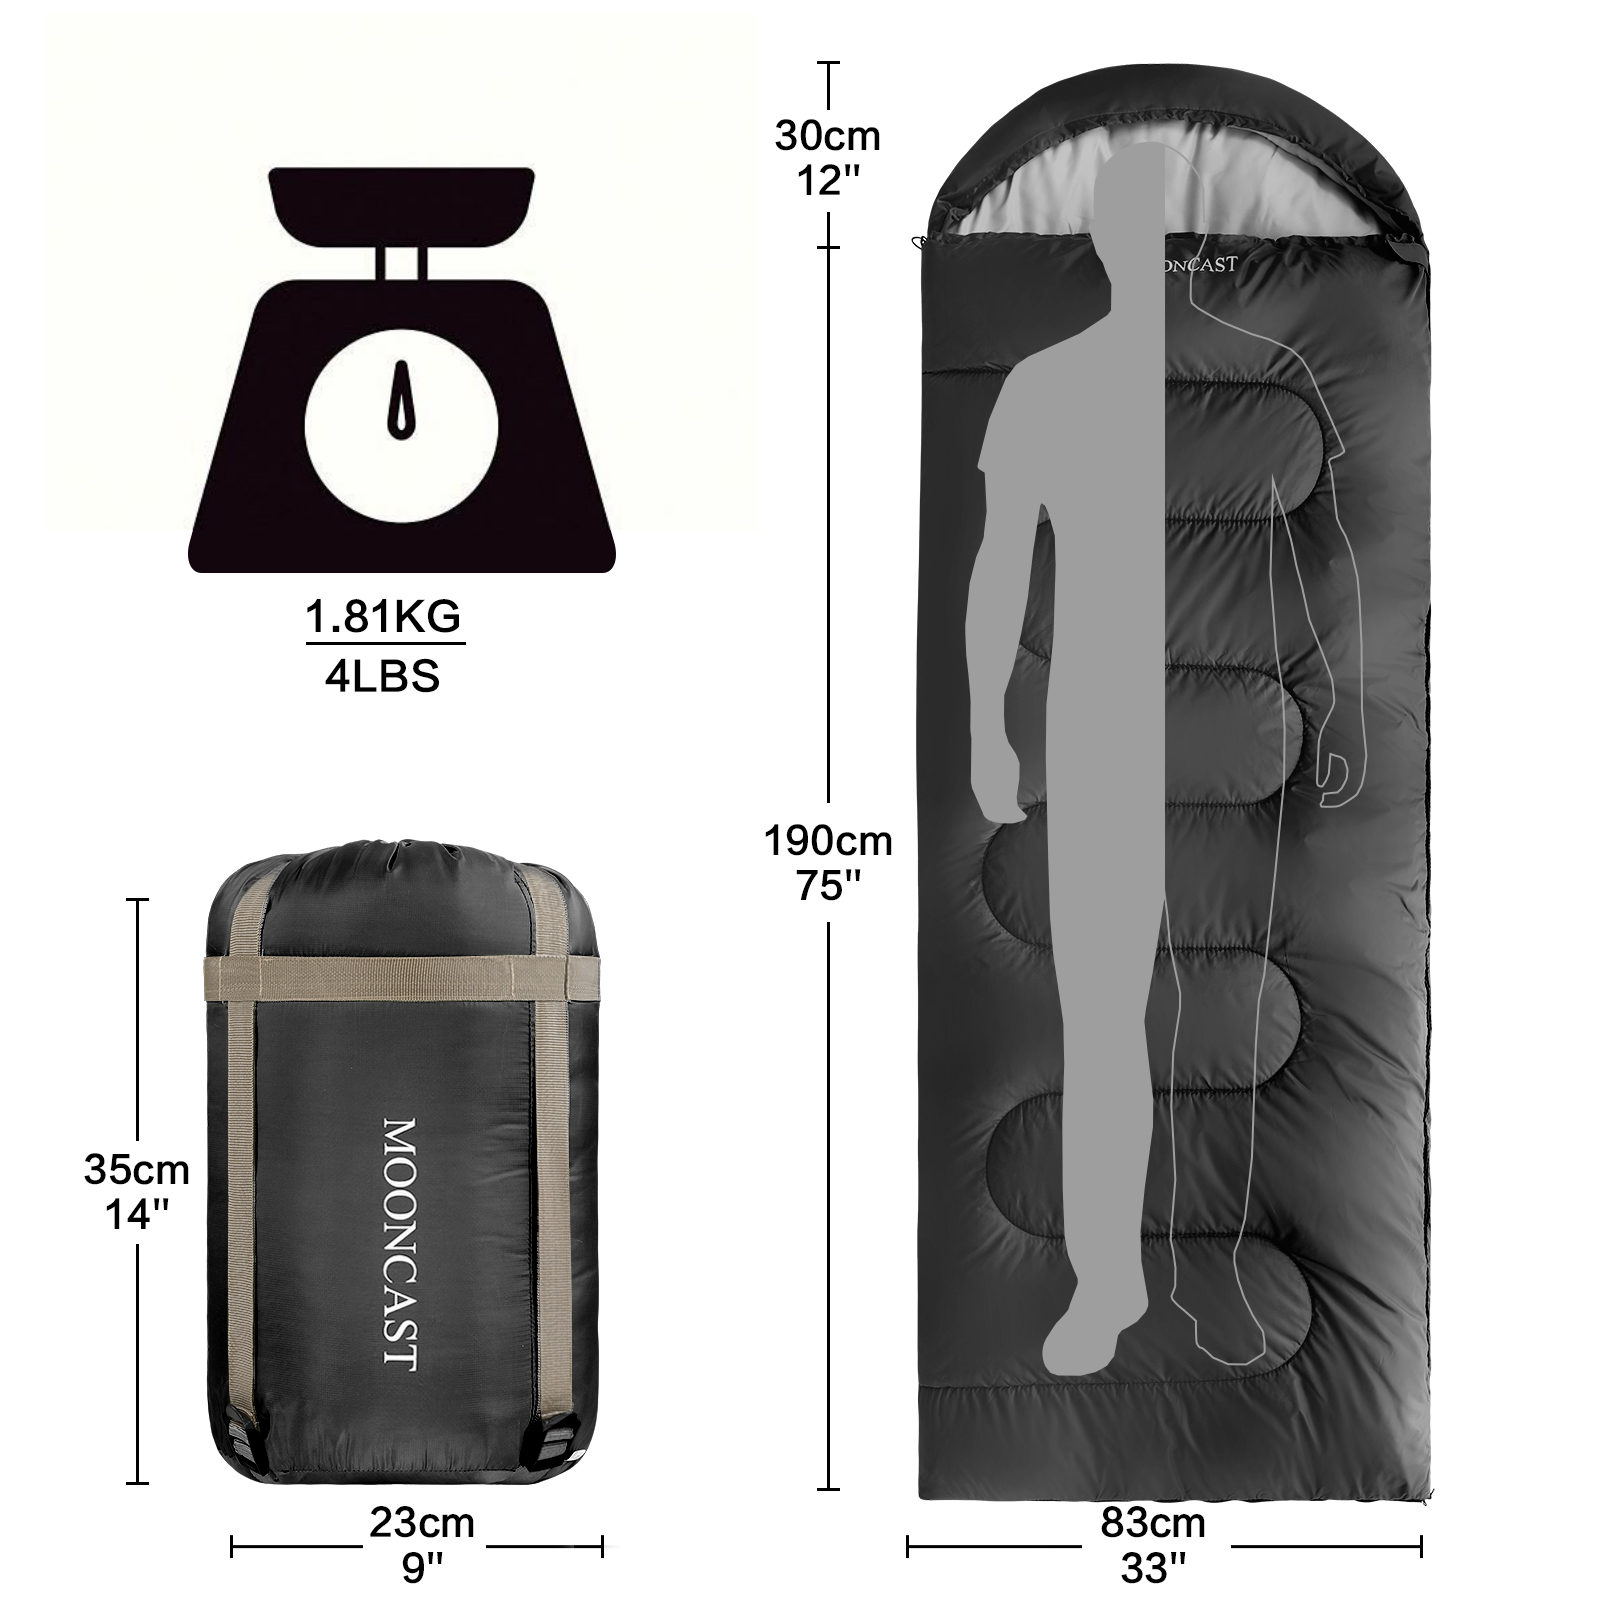 MOONCAST 0 ºC Sleeping Bags, Compression Sack Portable and Lightweight for Camping, Dark Gray - image 5 of 6